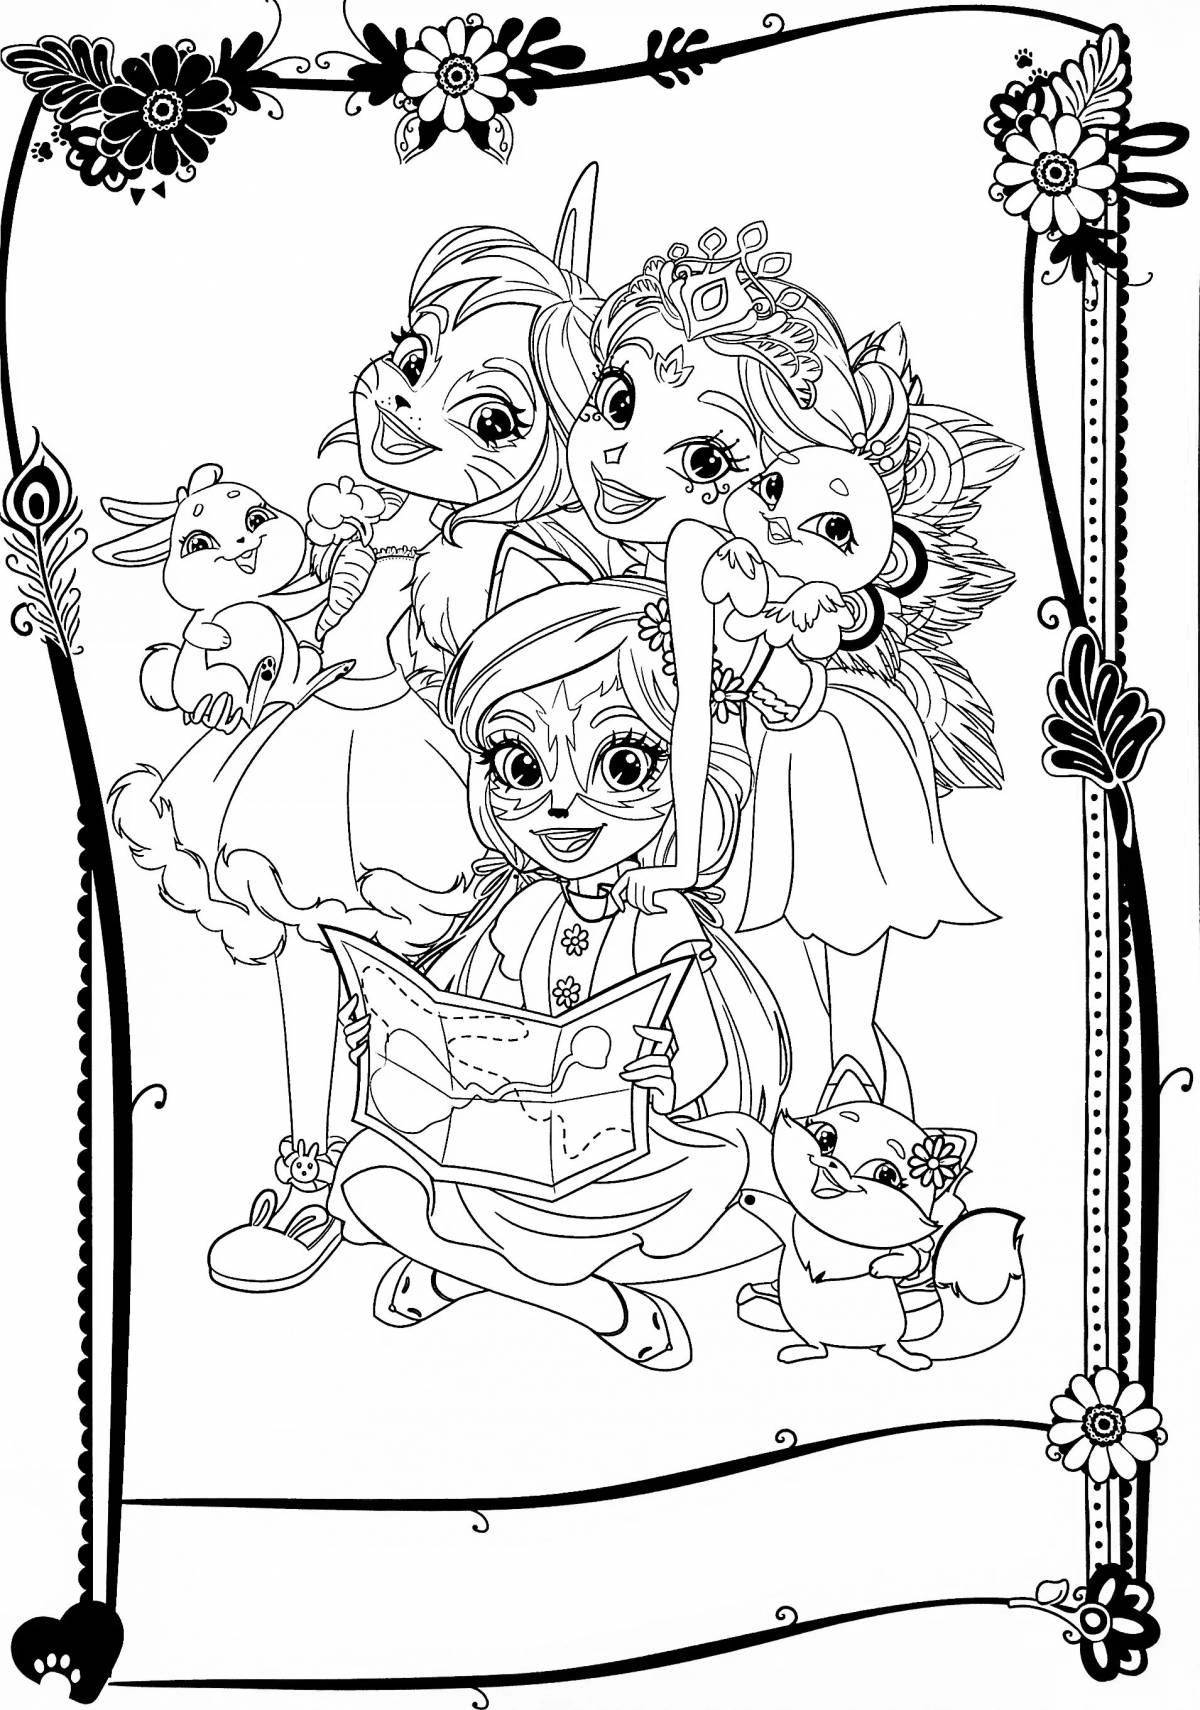 Enchantimus awesome coloring book